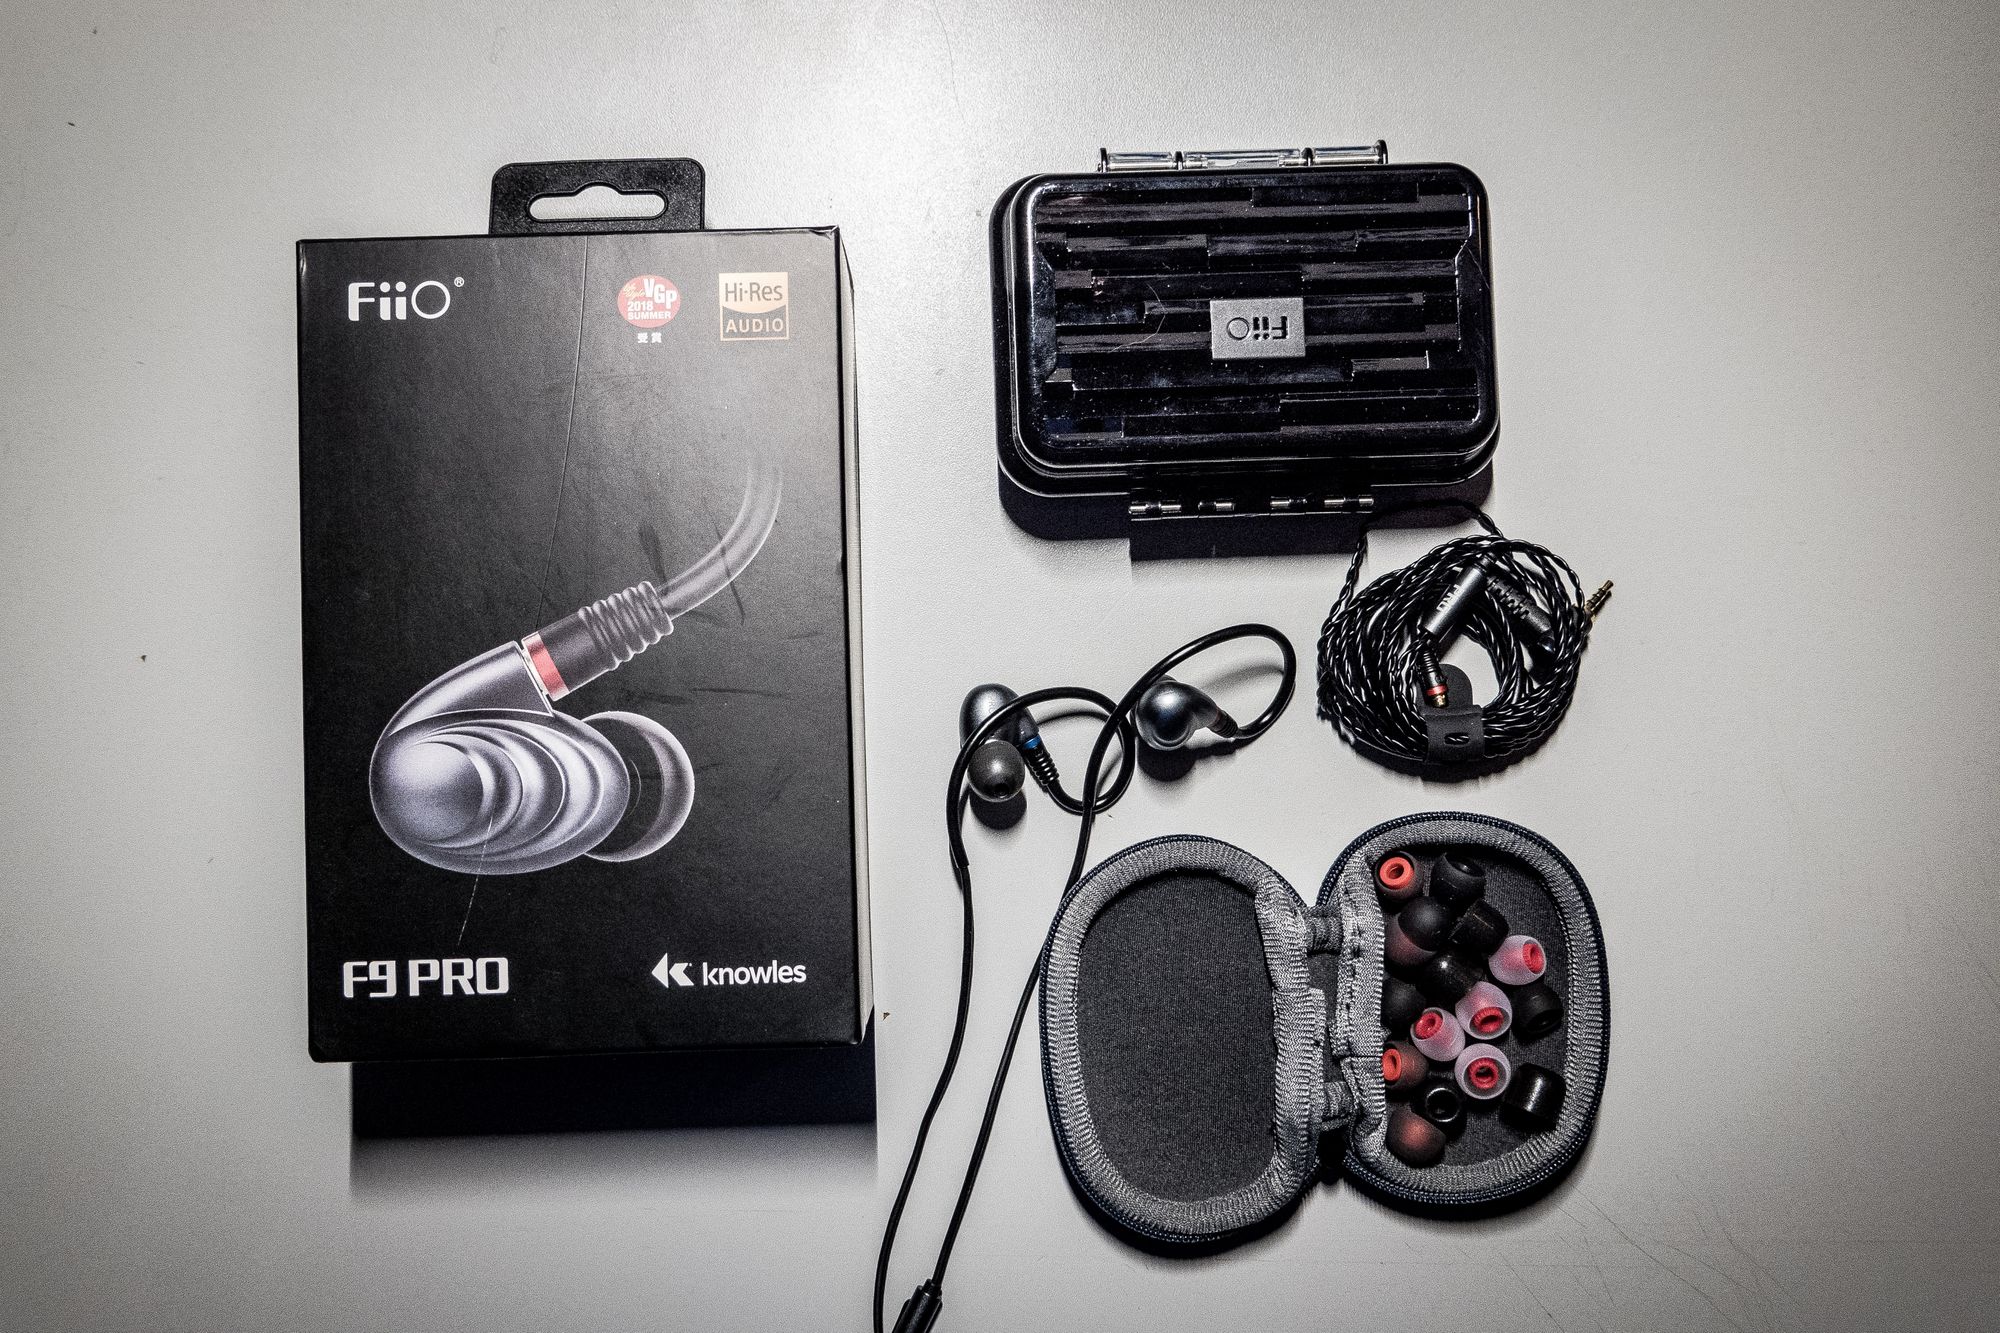 The FiiO F9 Pro box and its contents sitting on a desk